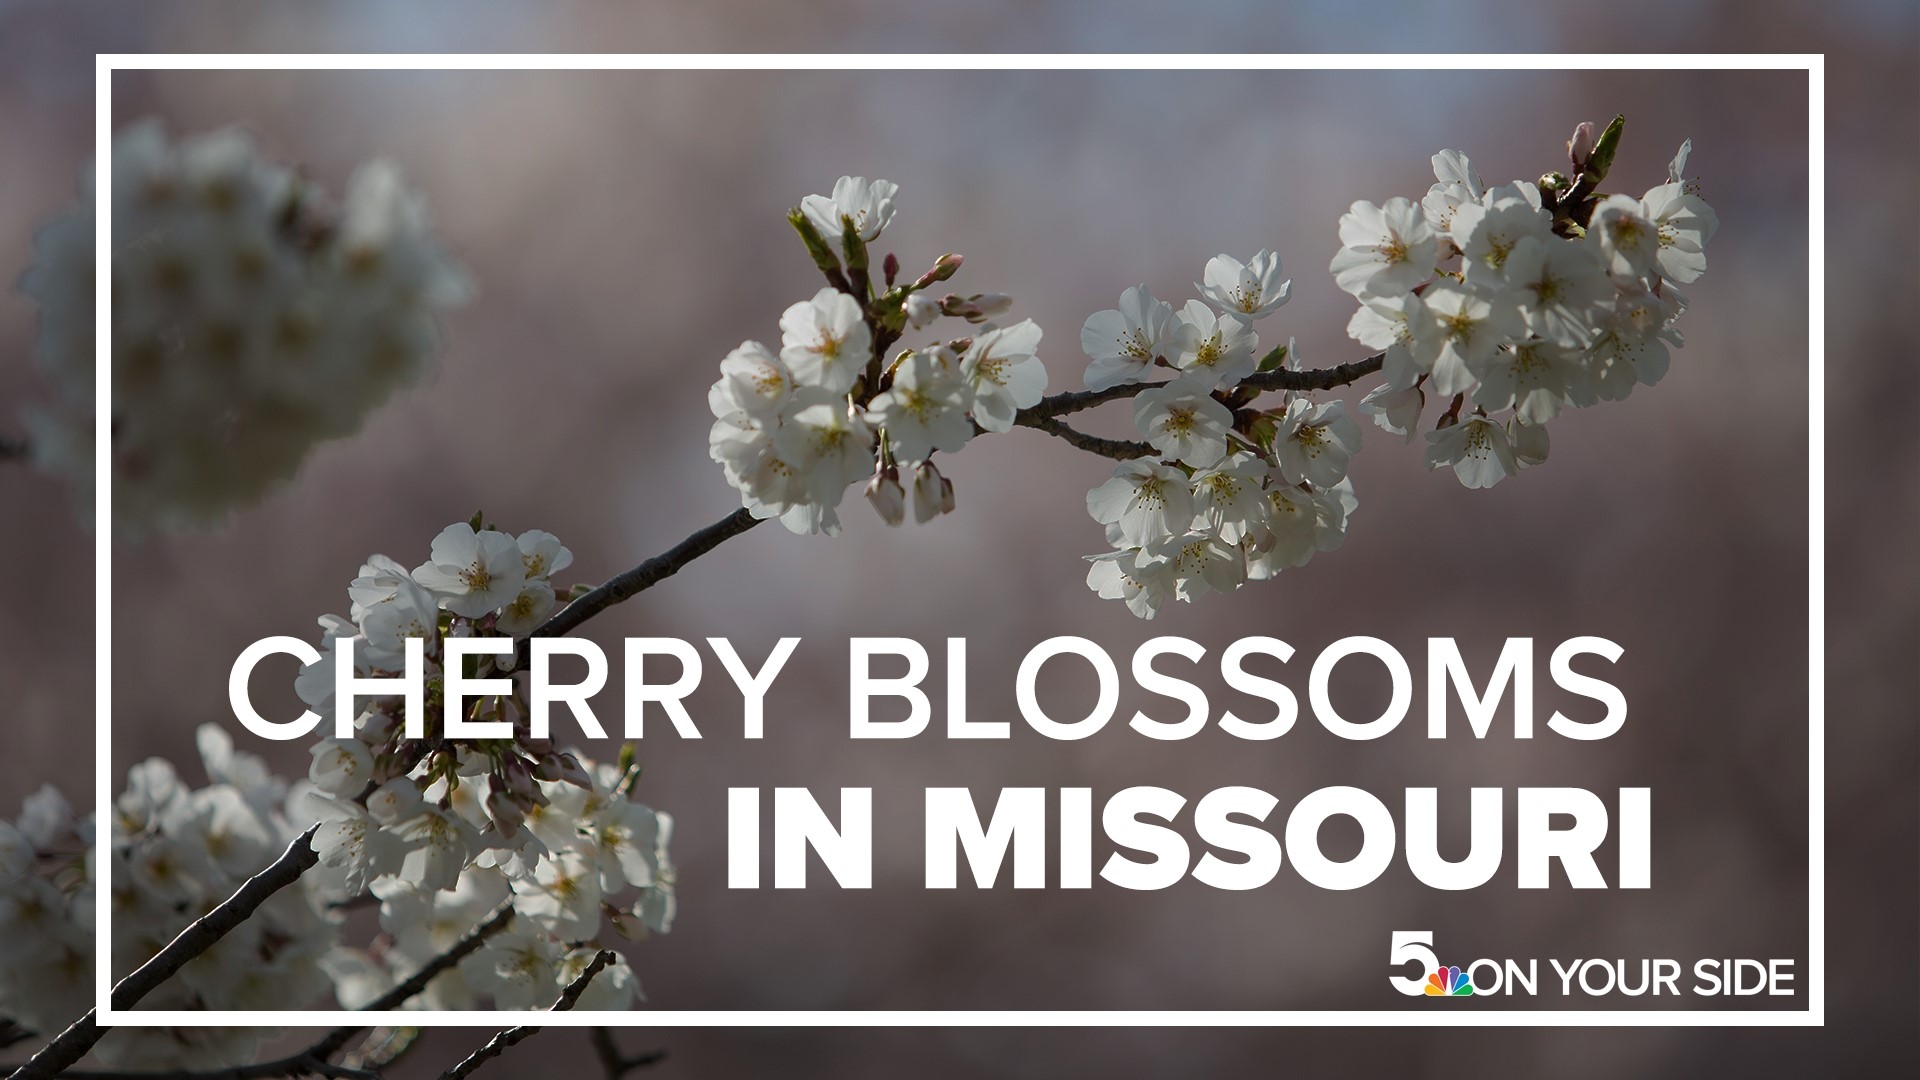 The cherry blossom, also called sakura in Japanese, fills the garden with vivid white and soft pink hues every March and April.